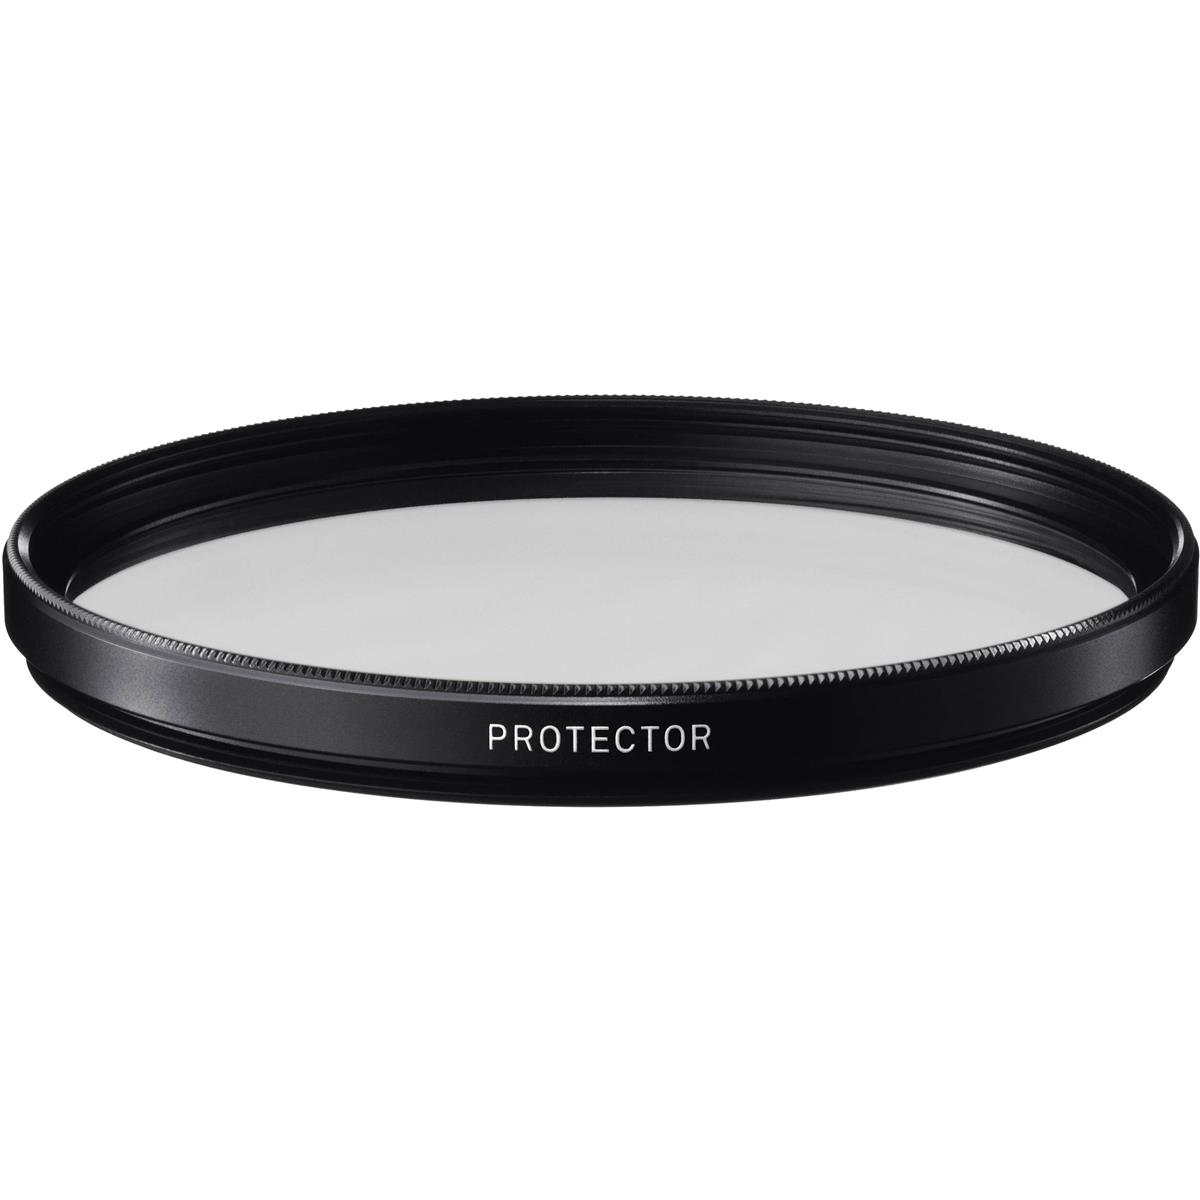 Sigma 46mm WR Protector Filter - Water & Oil Repellent & Antistatic